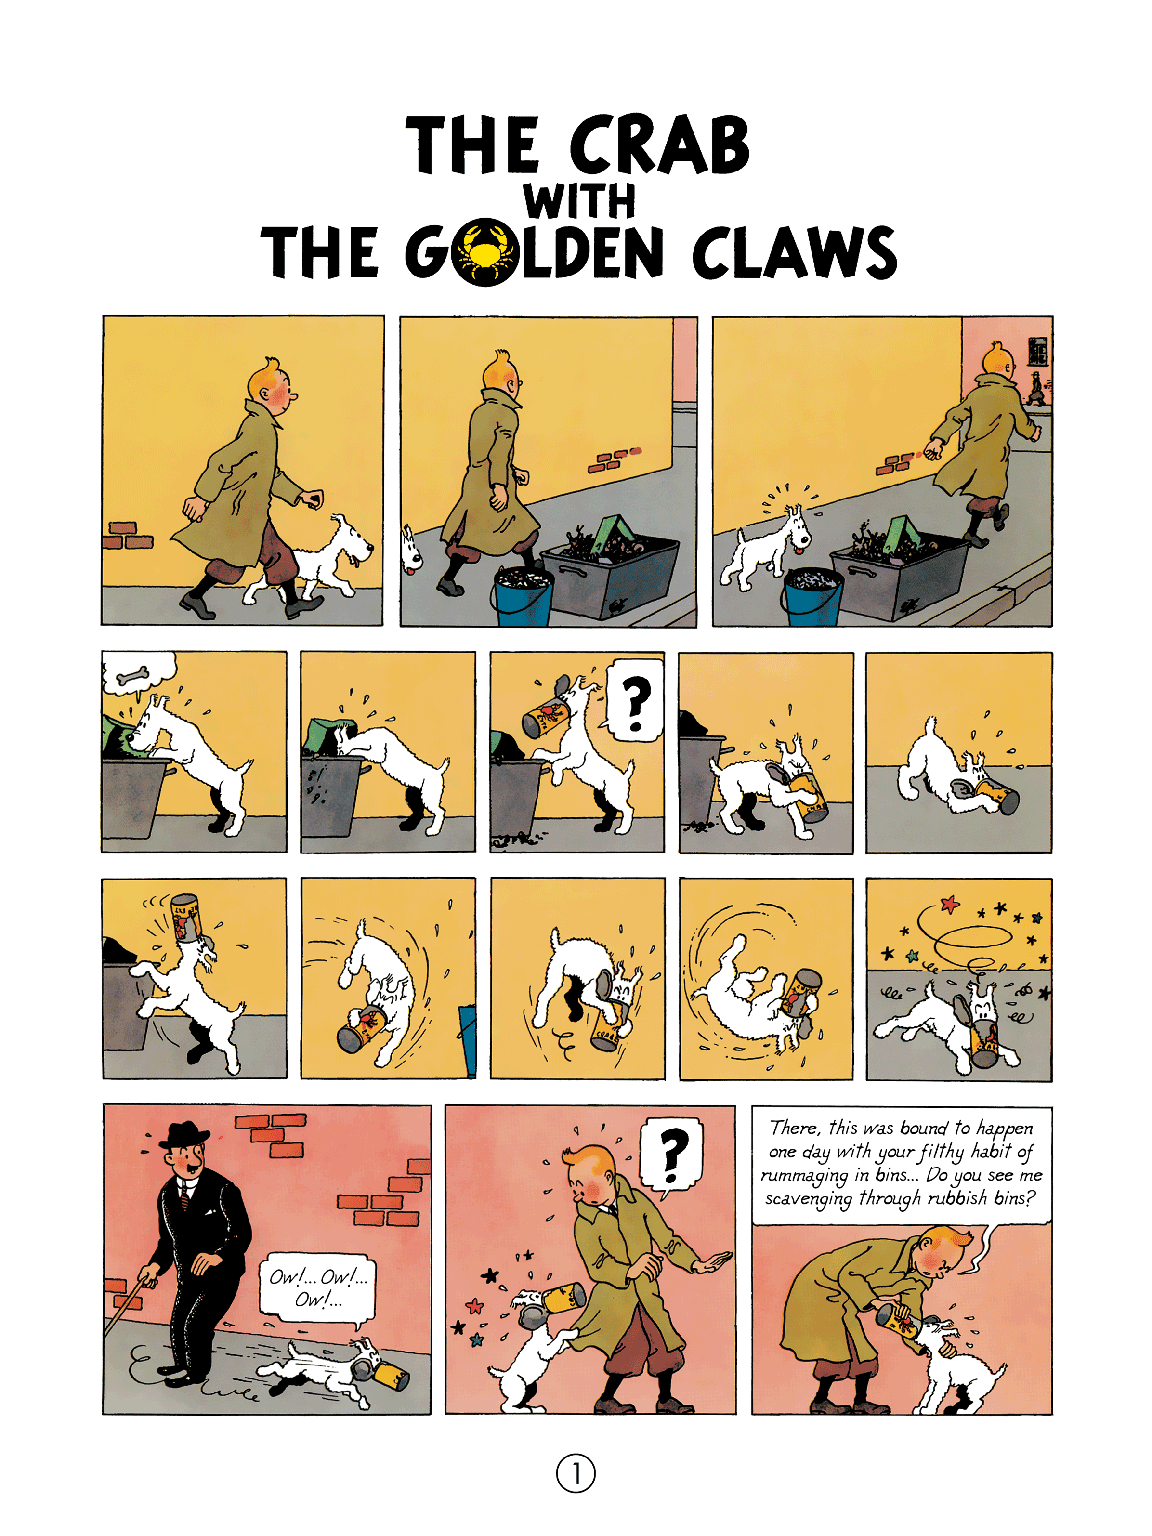 Tintin The Crab with the Golden Claws (The Adventures of Tintin) by Hergé